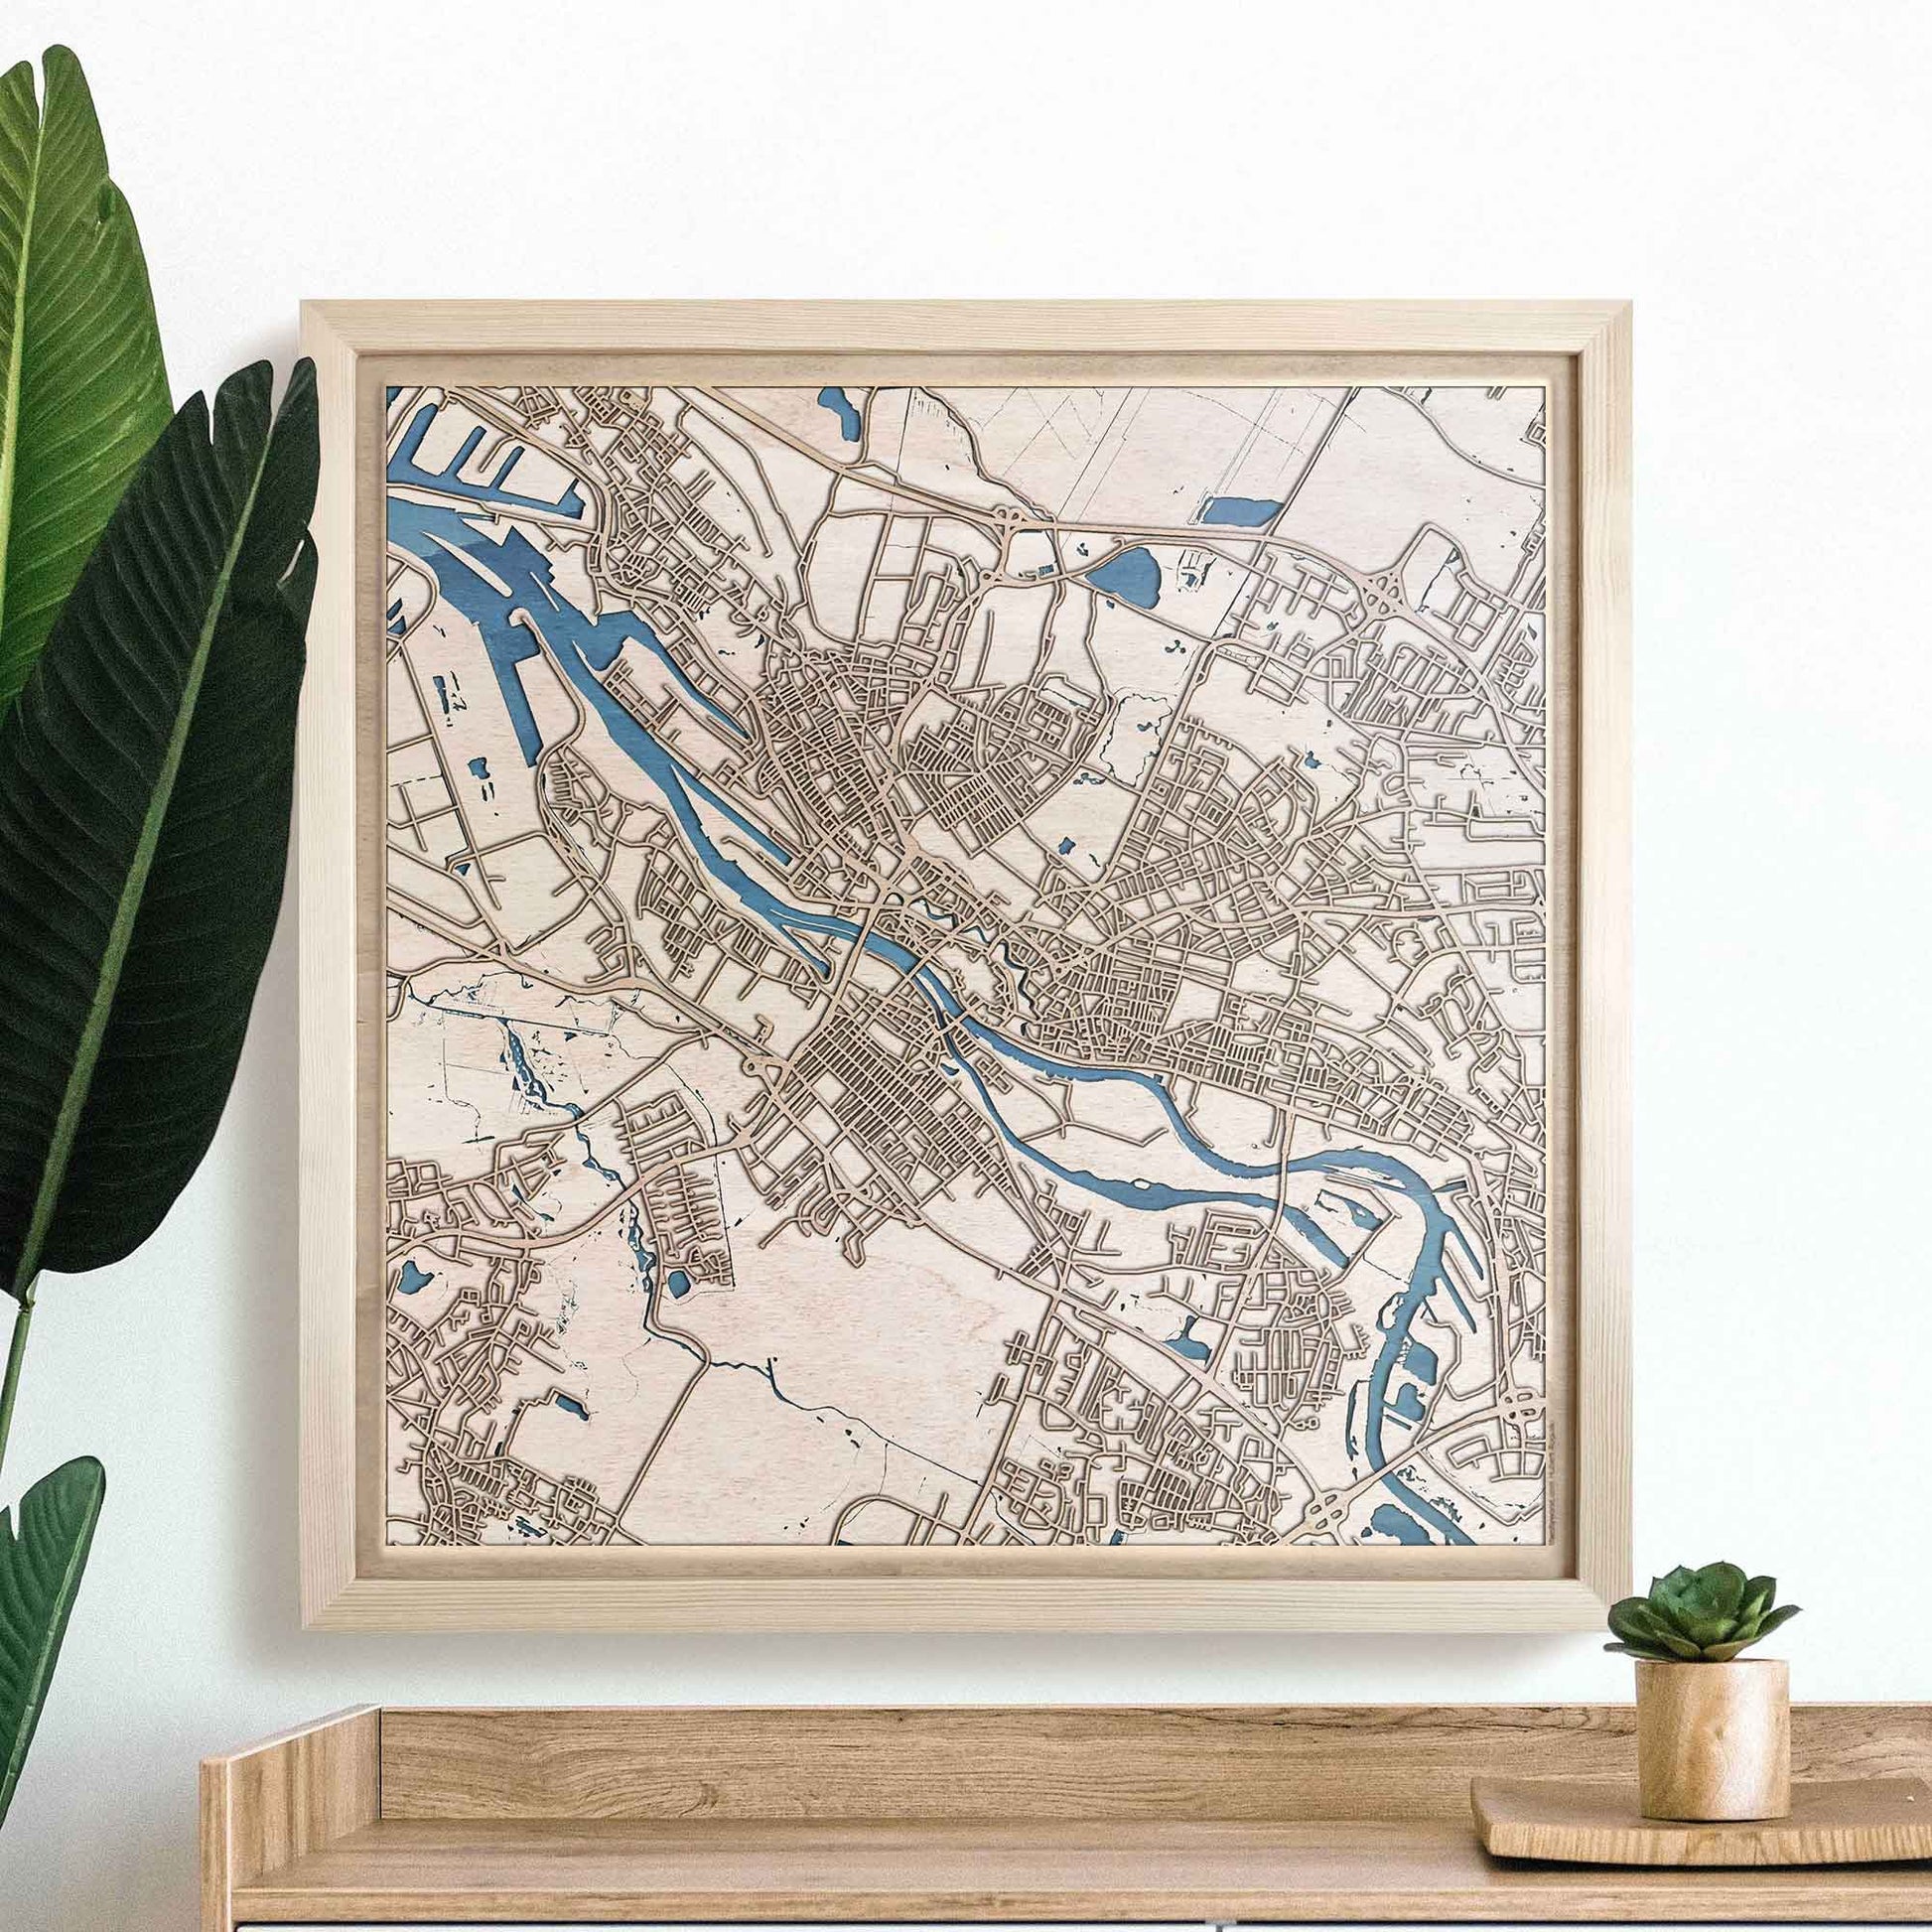 Bremen Wooden Map by CityWood - Custom Wood Map Art - Unique Laser Cut Engraved - Anniversary Gift